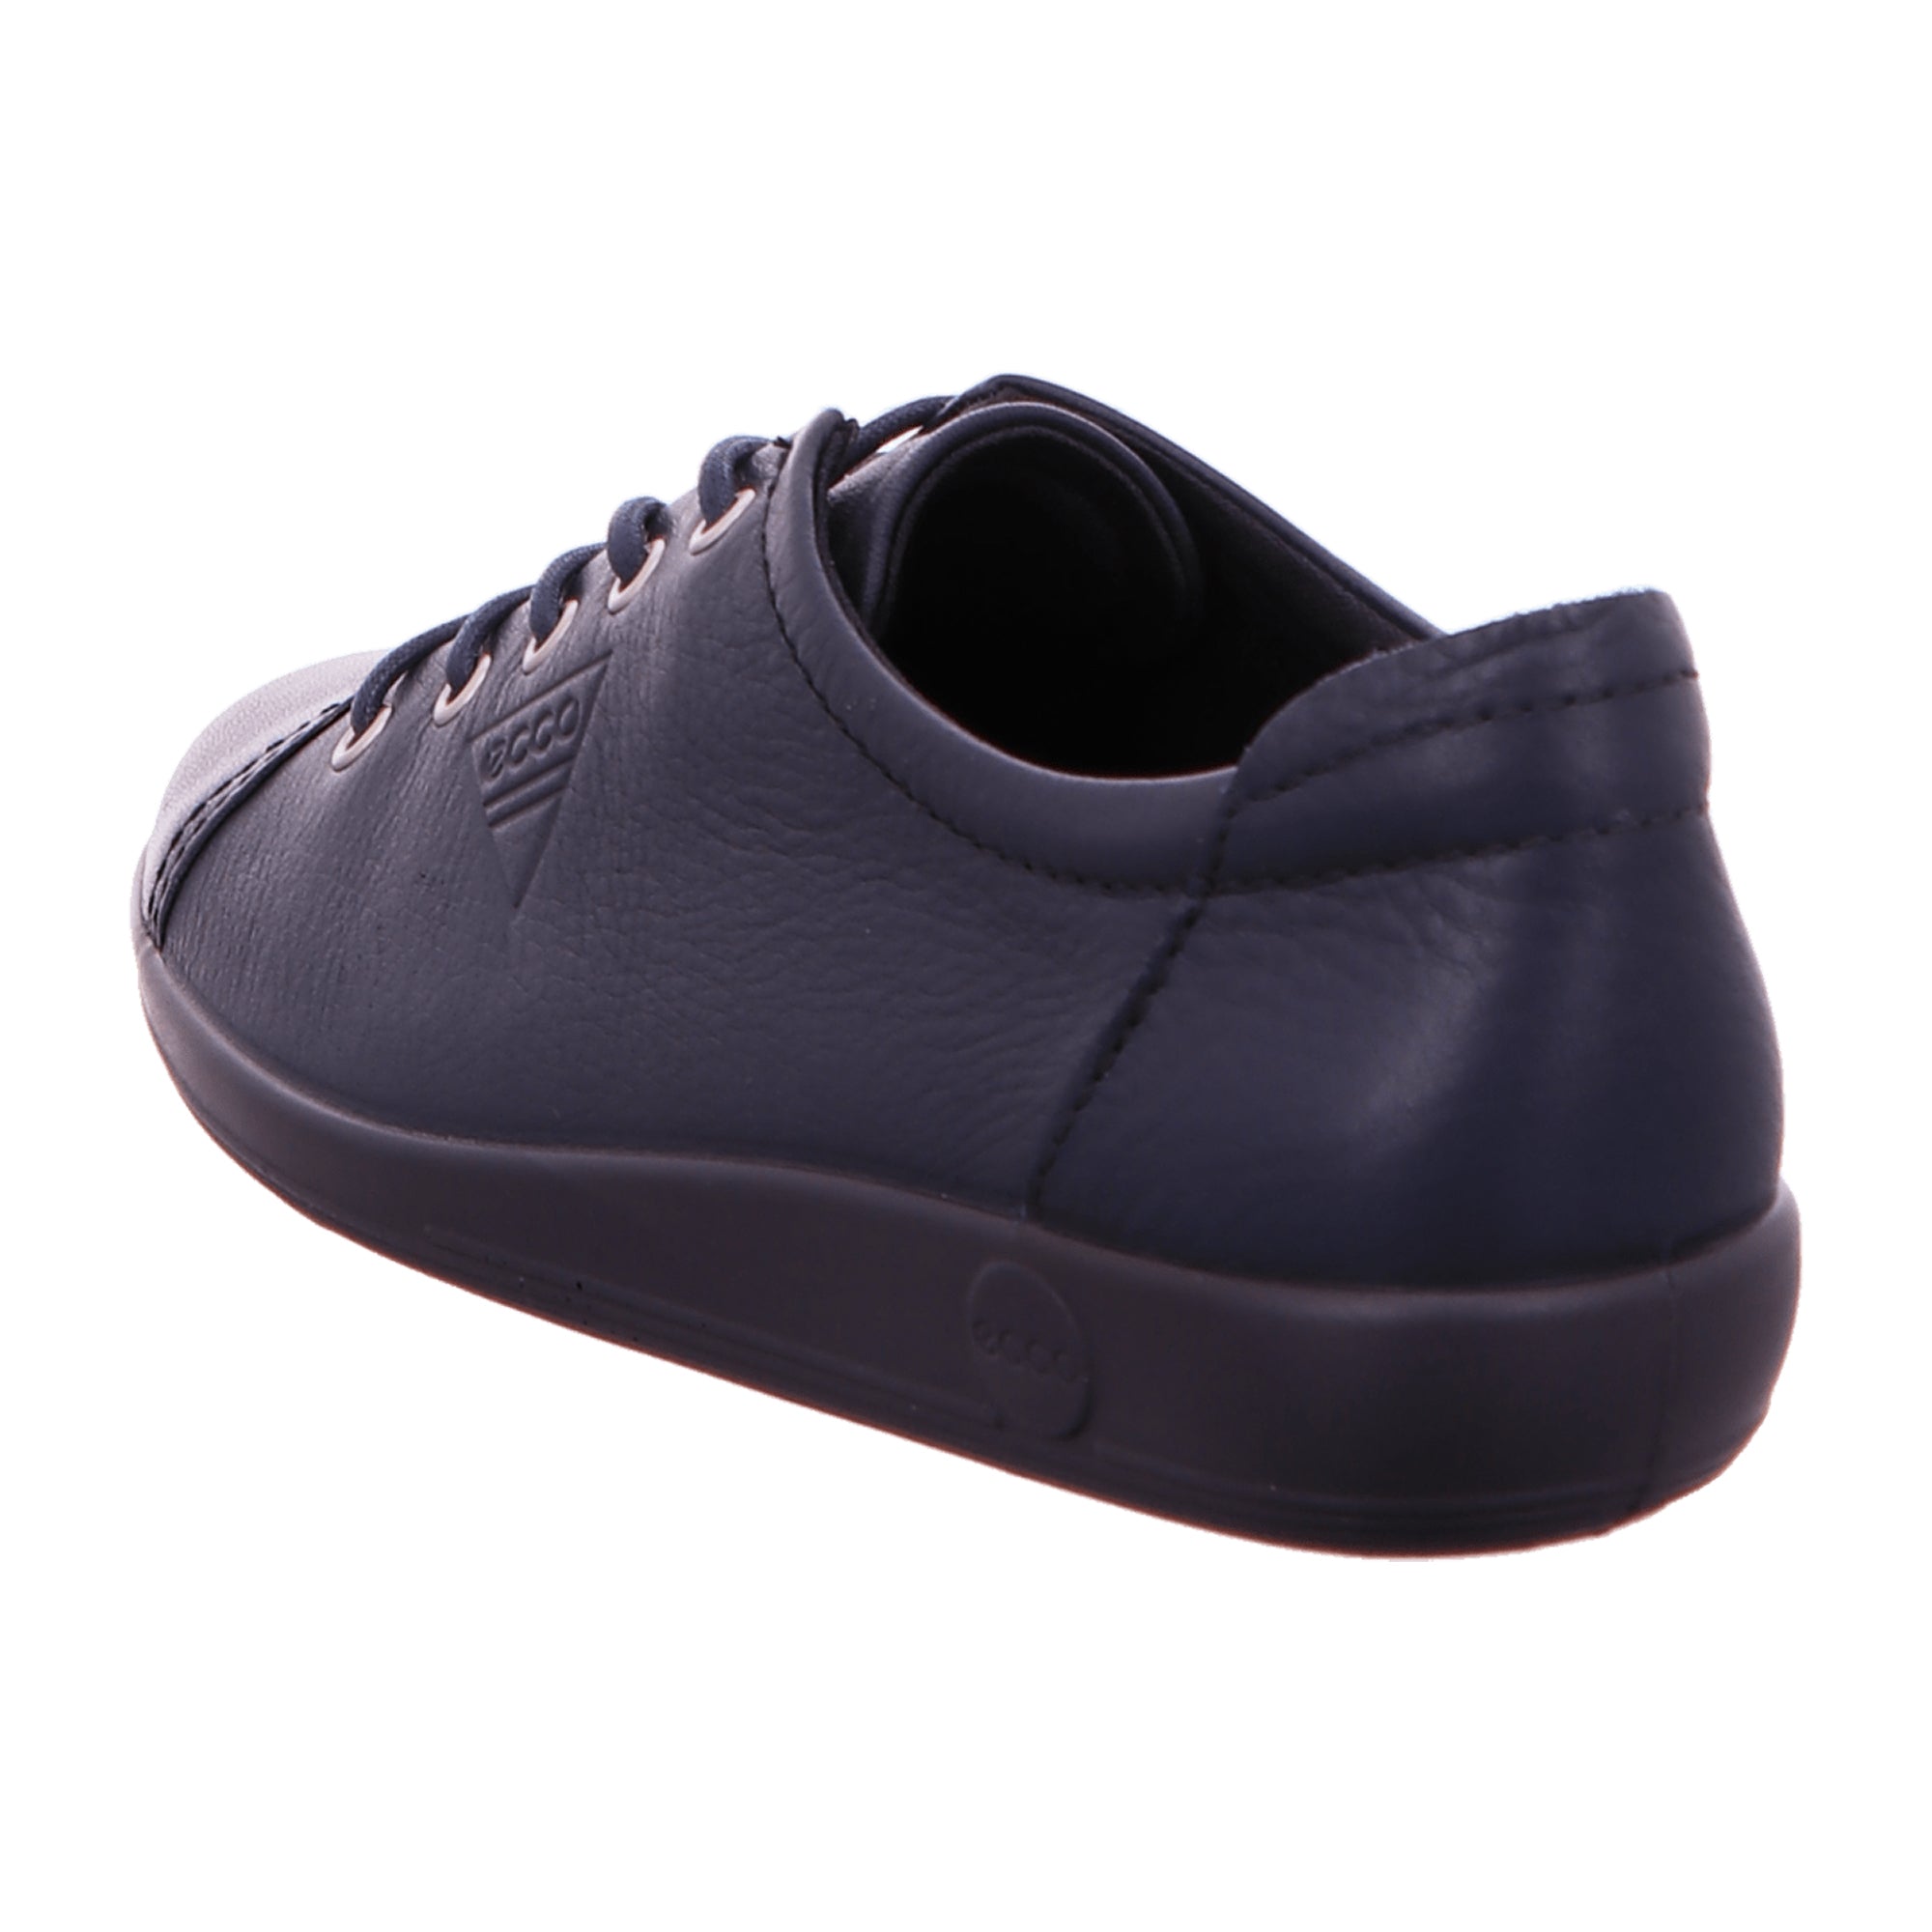 Ecco Women's Blue Shoes - Stylish & Durable Comfort Footwear for Young Adults